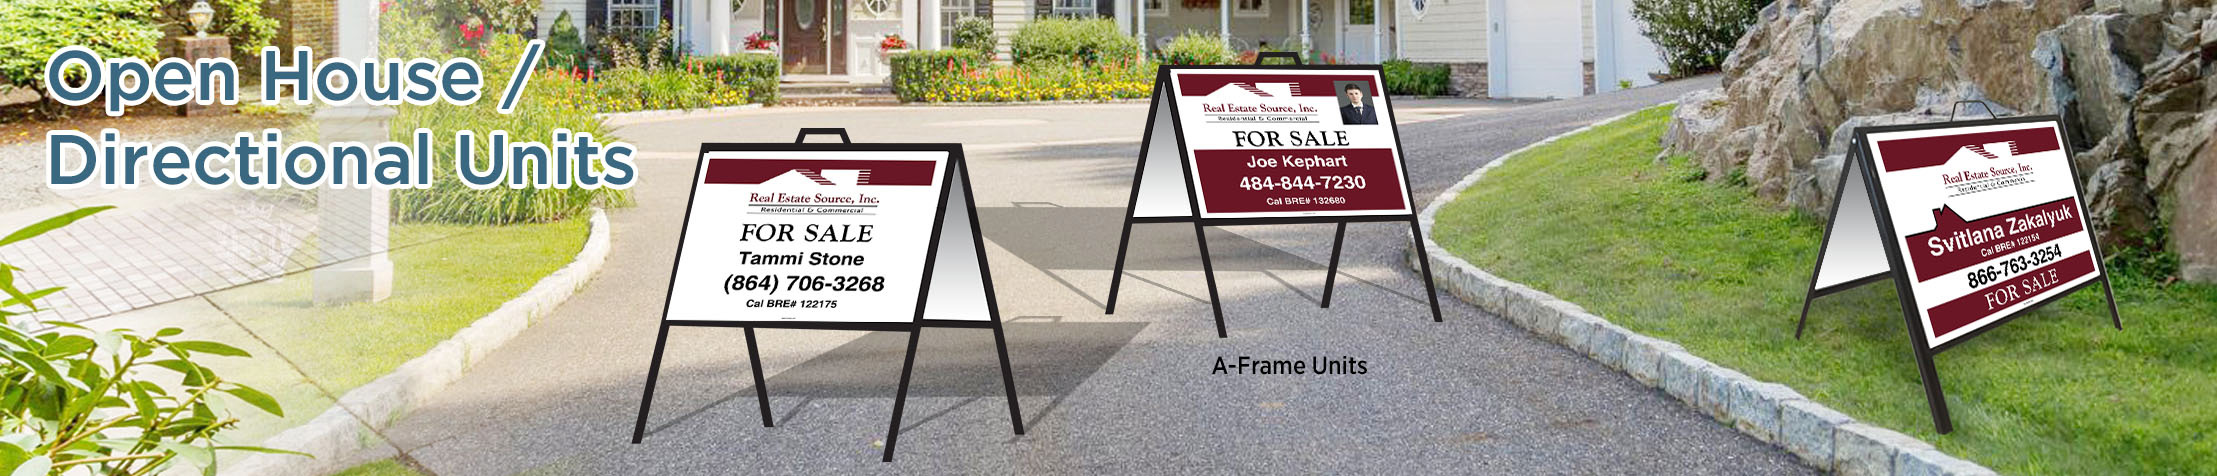 Real Estate Source Real Estate Open House/Directional Units - directional real estate signs | BestPrintBuy.com